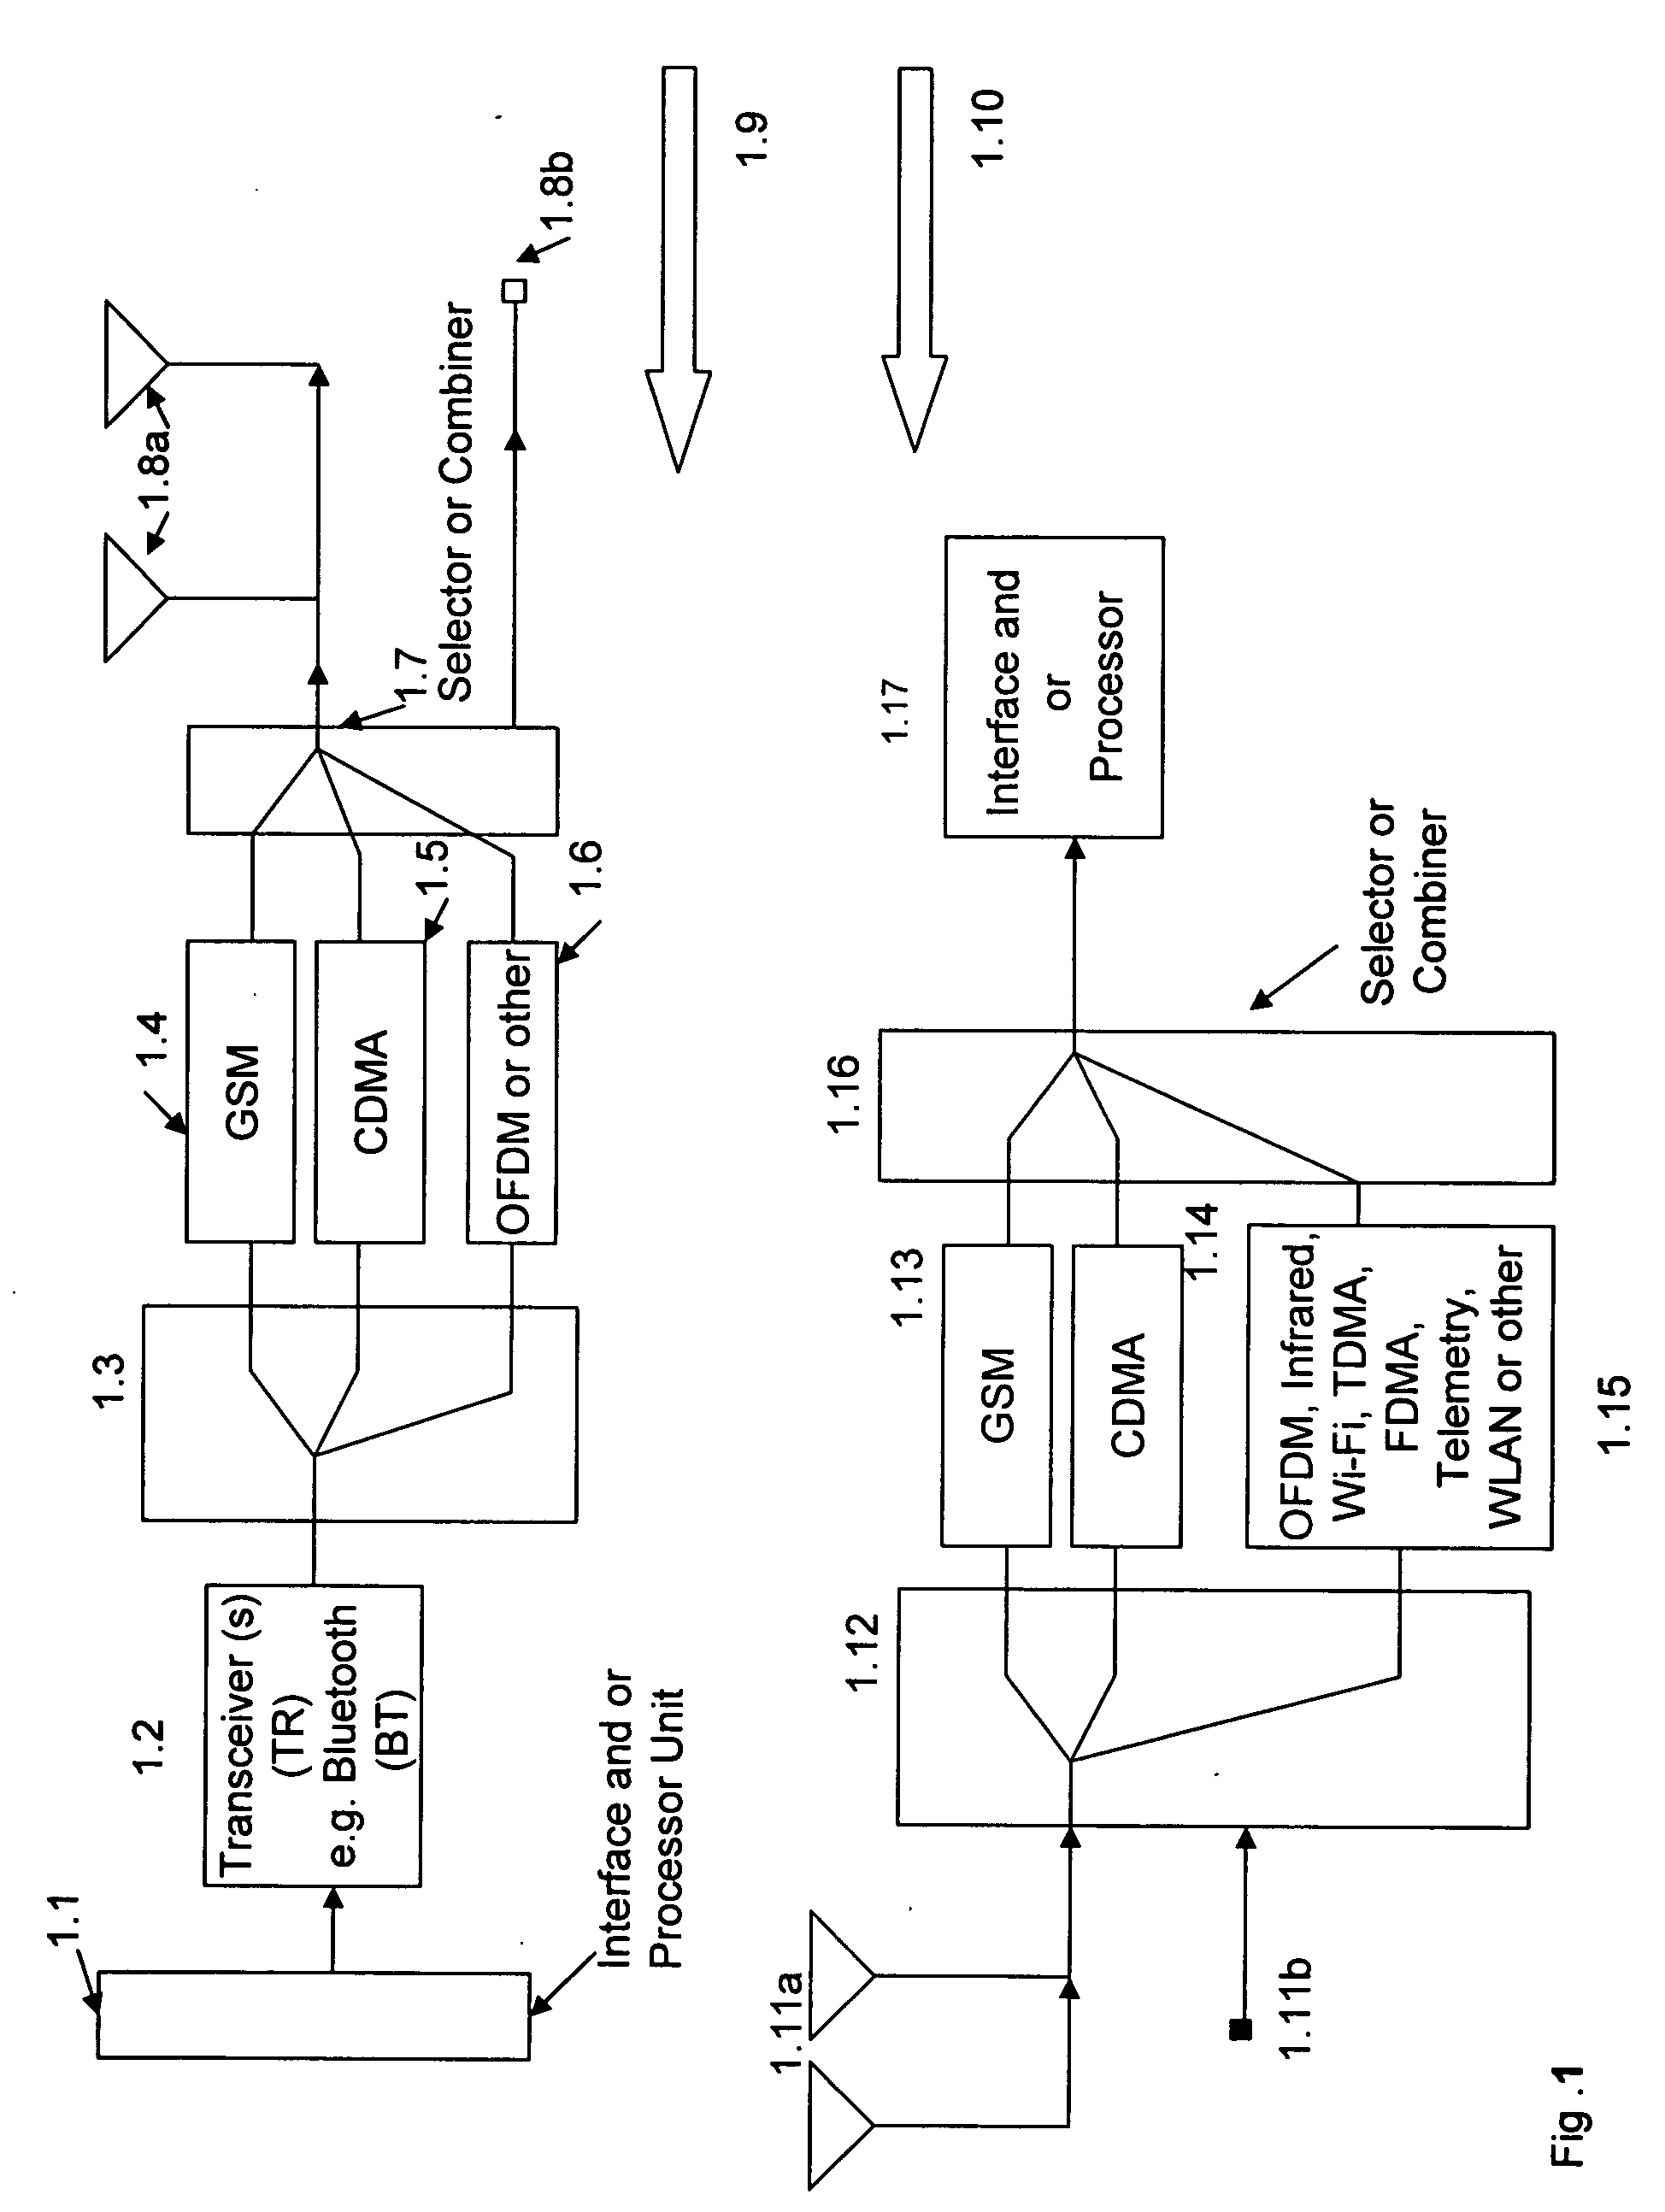 Medical diagnostic and communication system